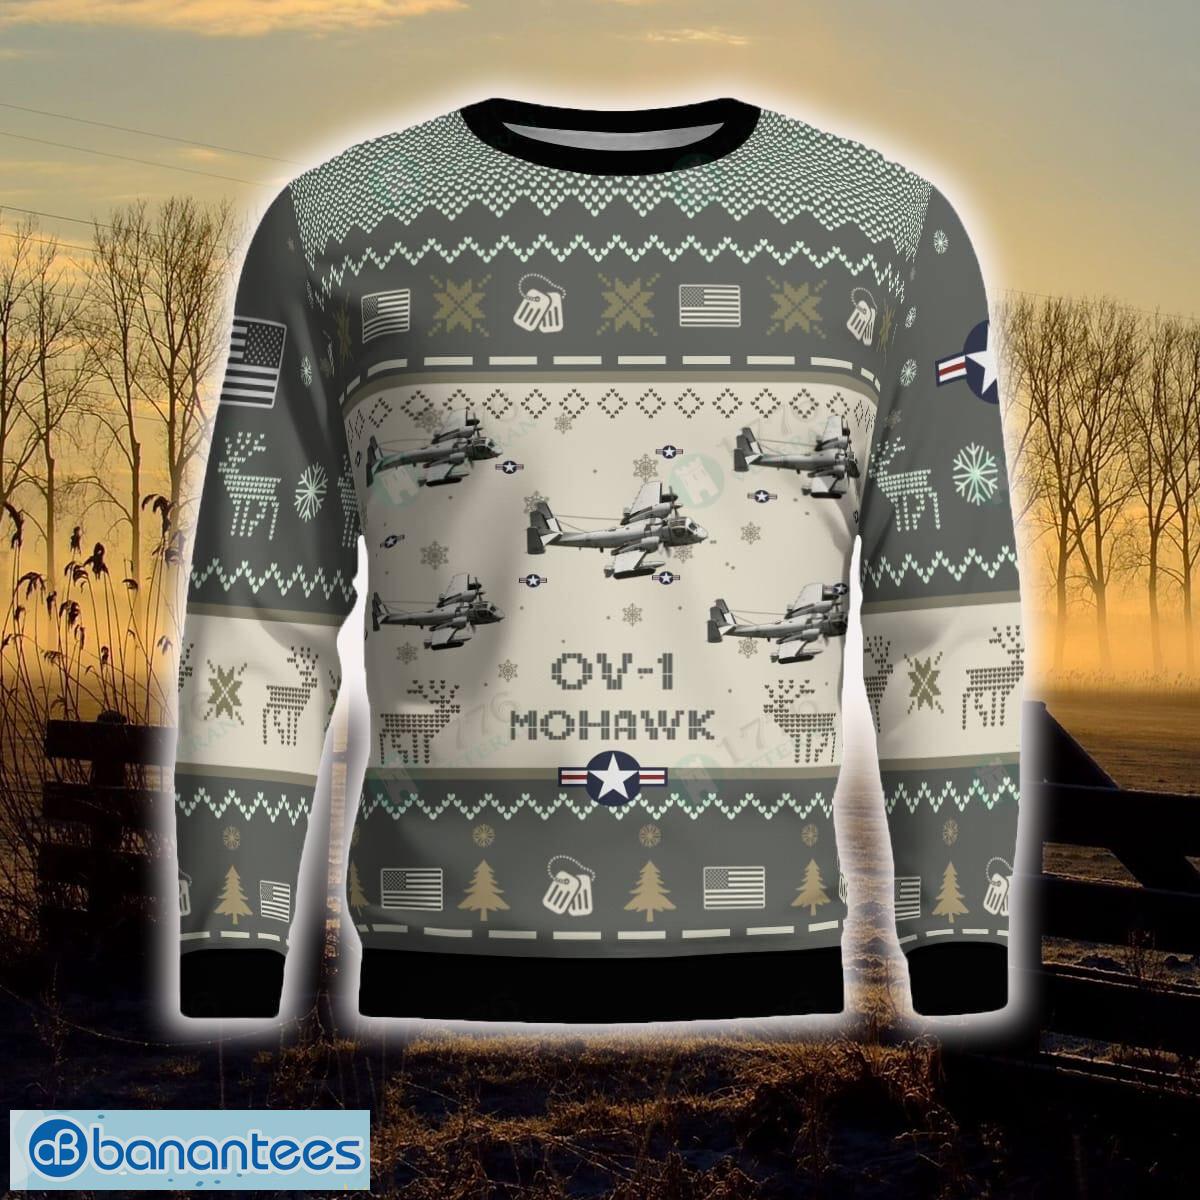 OV-1 Mohawk OV1 Aircraft Ugly Christmas Sweater Veterans Holidays For Men And Women - OV-1 Mohawk OV1_Aircraft Ugly Sweater_2